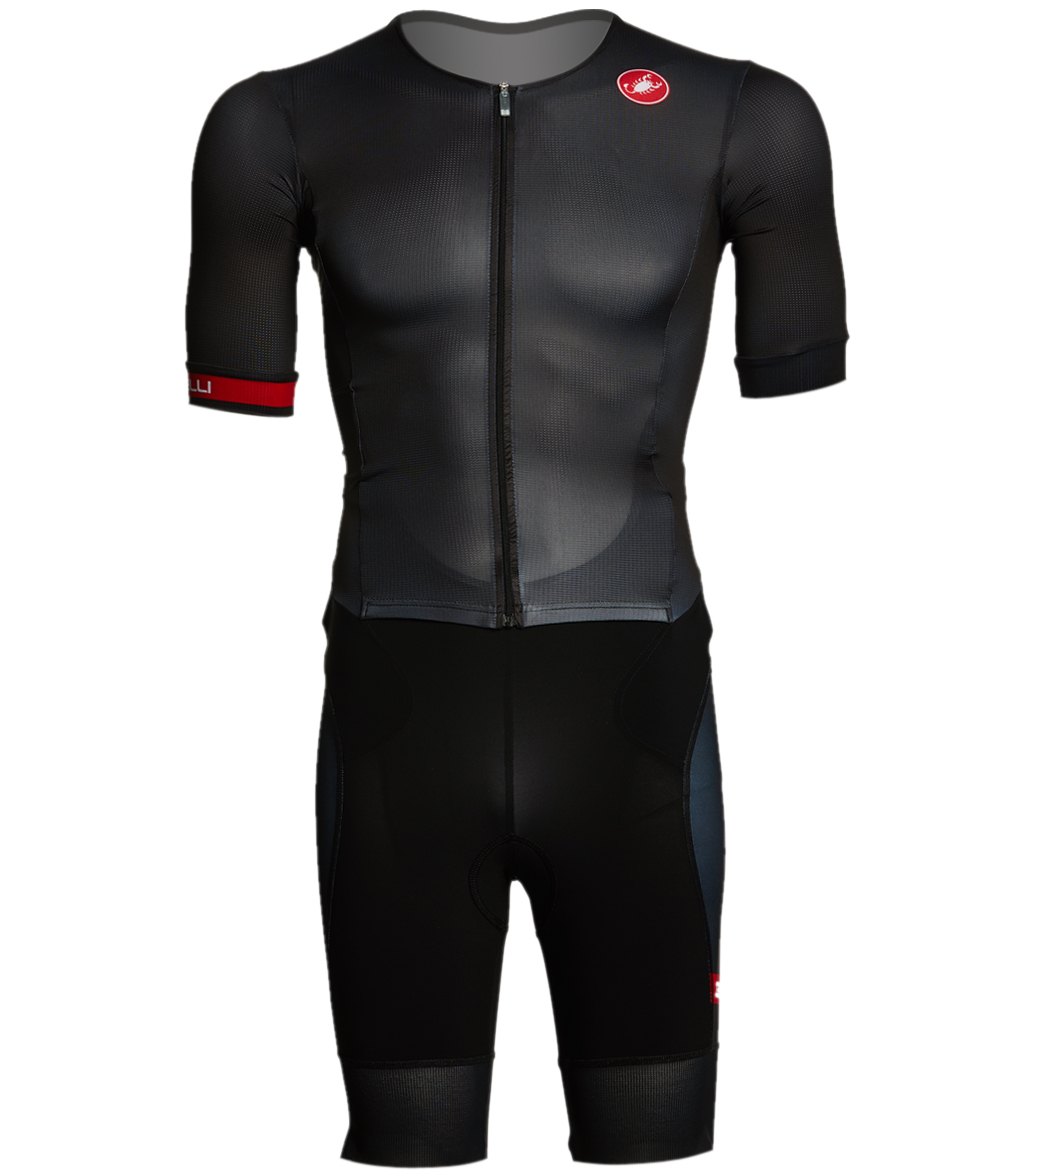 Castelli Men's Free Sanremo SS Tri Suit at SwimOutlet.com - Free Shipping